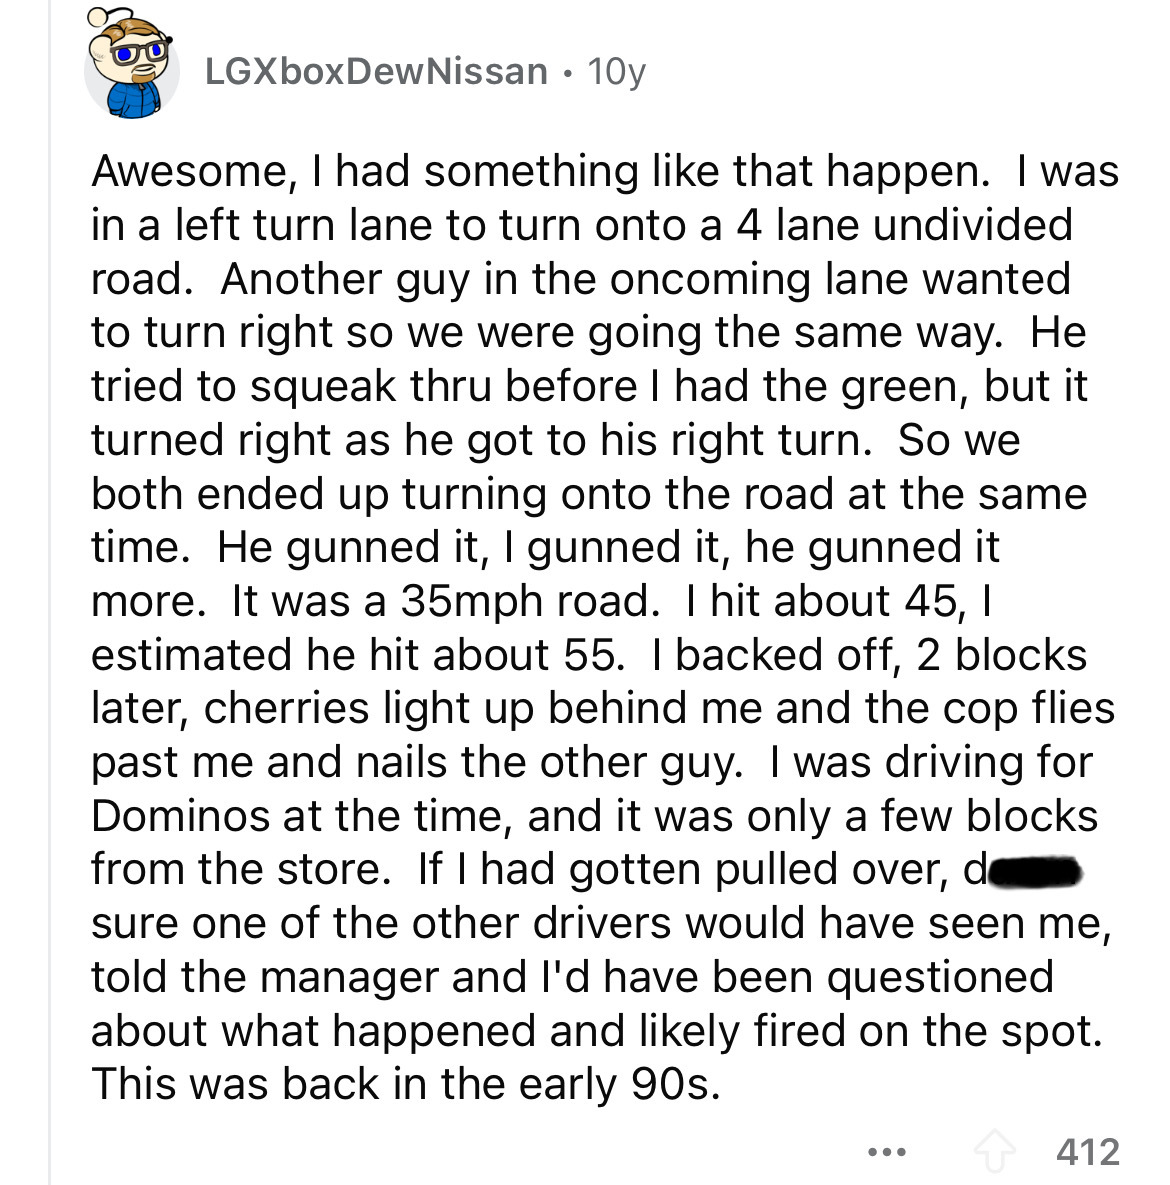 document - LGXboxDew Nissan 10y Awesome, I had something that happen. I was in a left turn lane to turn onto a 4 lane undivided road. Another guy in the oncoming lane wanted to turn right so we were going the same way. He tried to squeak thru before I had